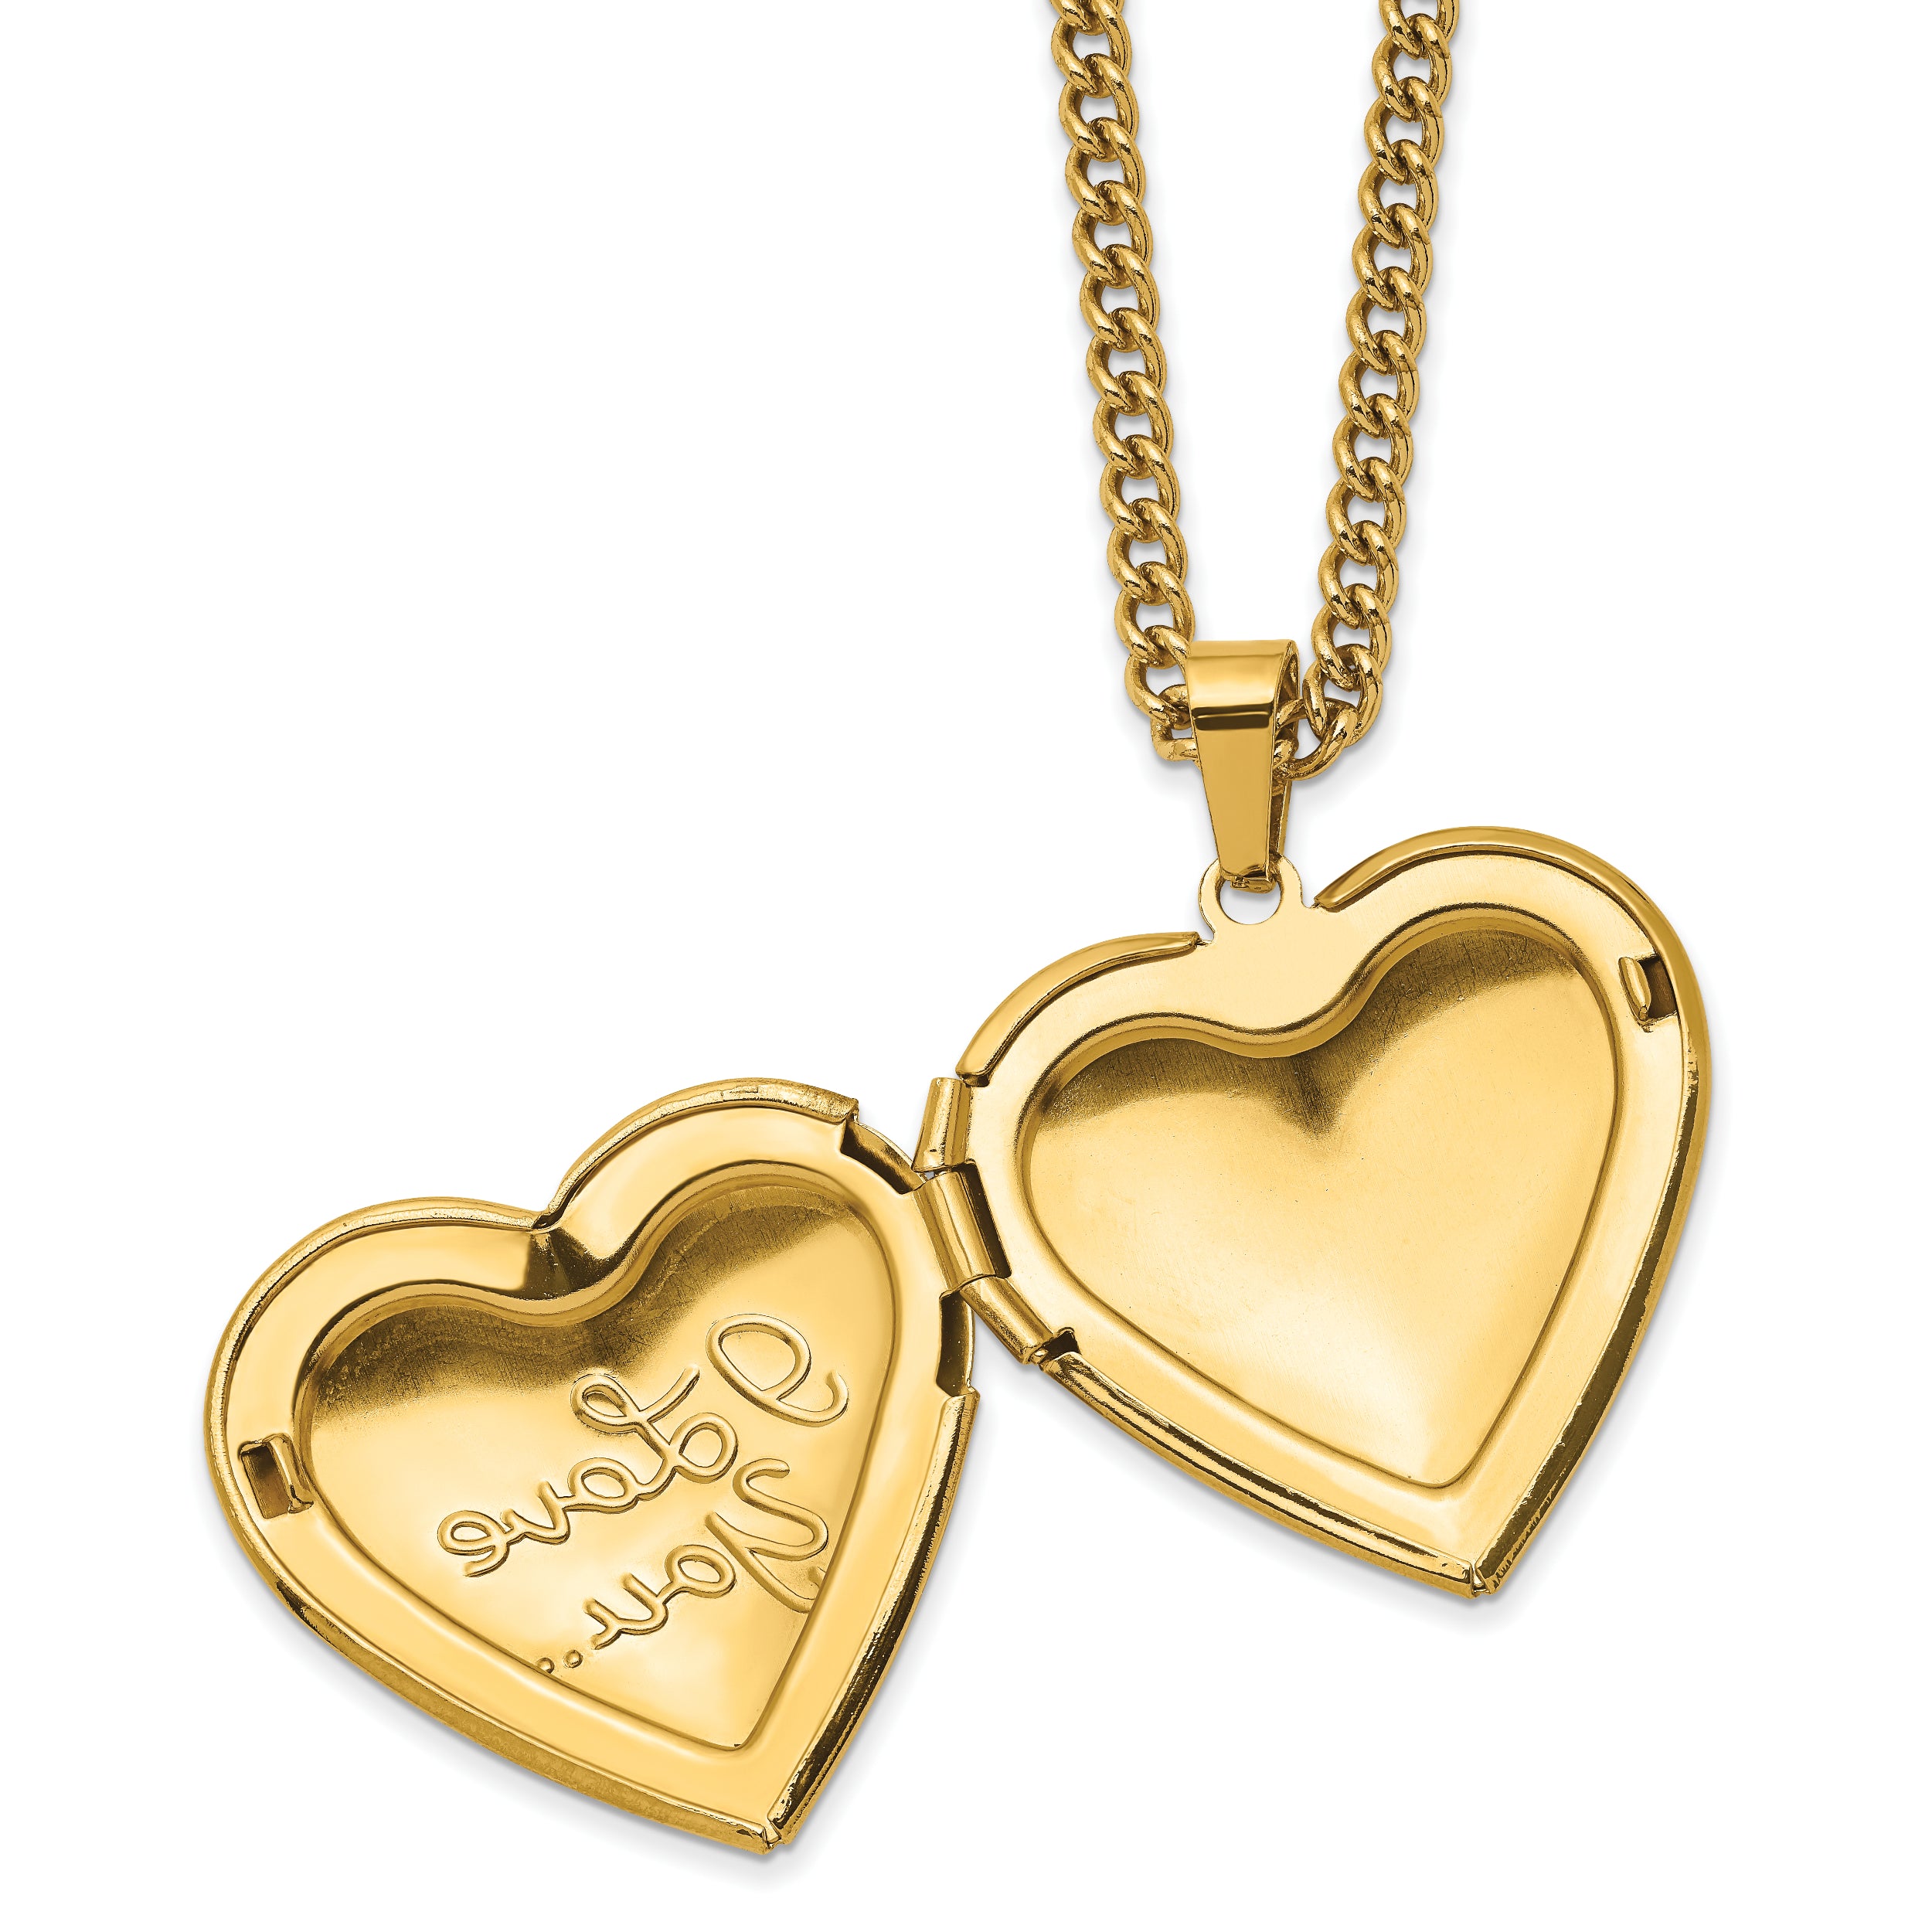 Chisel Stainless Steel Polished Yellow IP-plated I LOVE YOU Heart Locket on a 24 inch Curb Chain Necklace